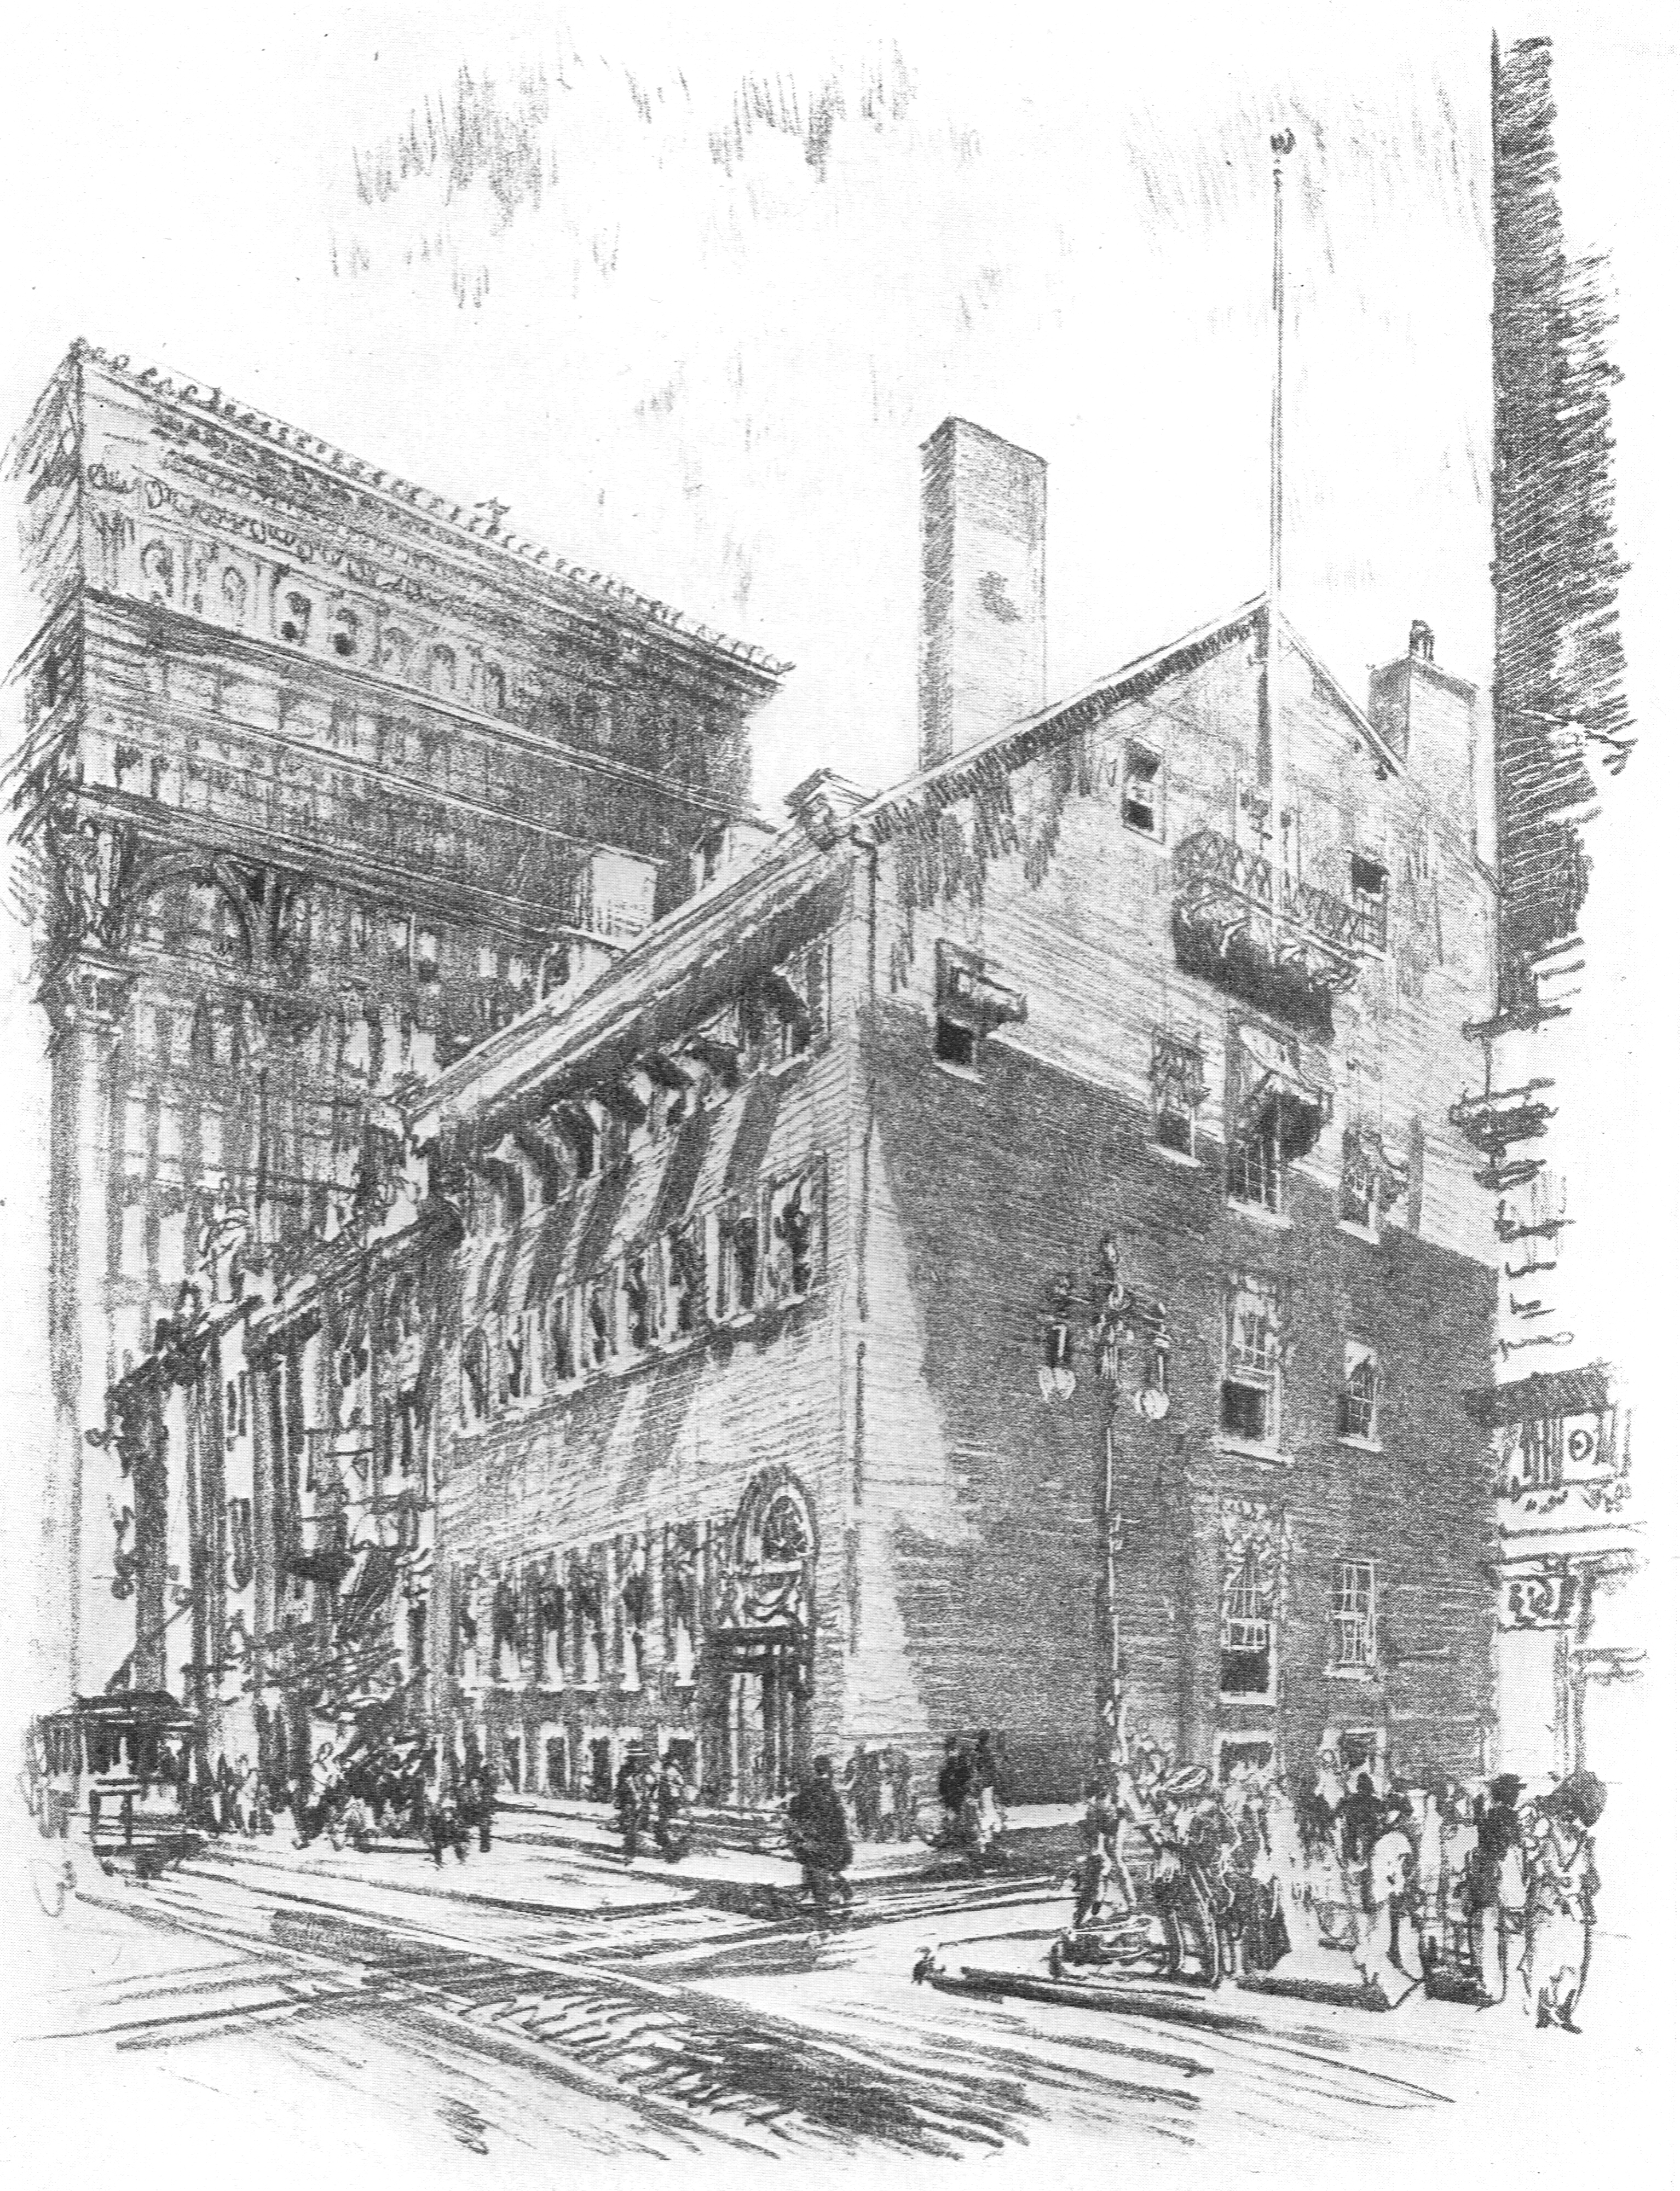 ''The Philadelphia Club'', a 1912 illustration by [[Joseph Pennell